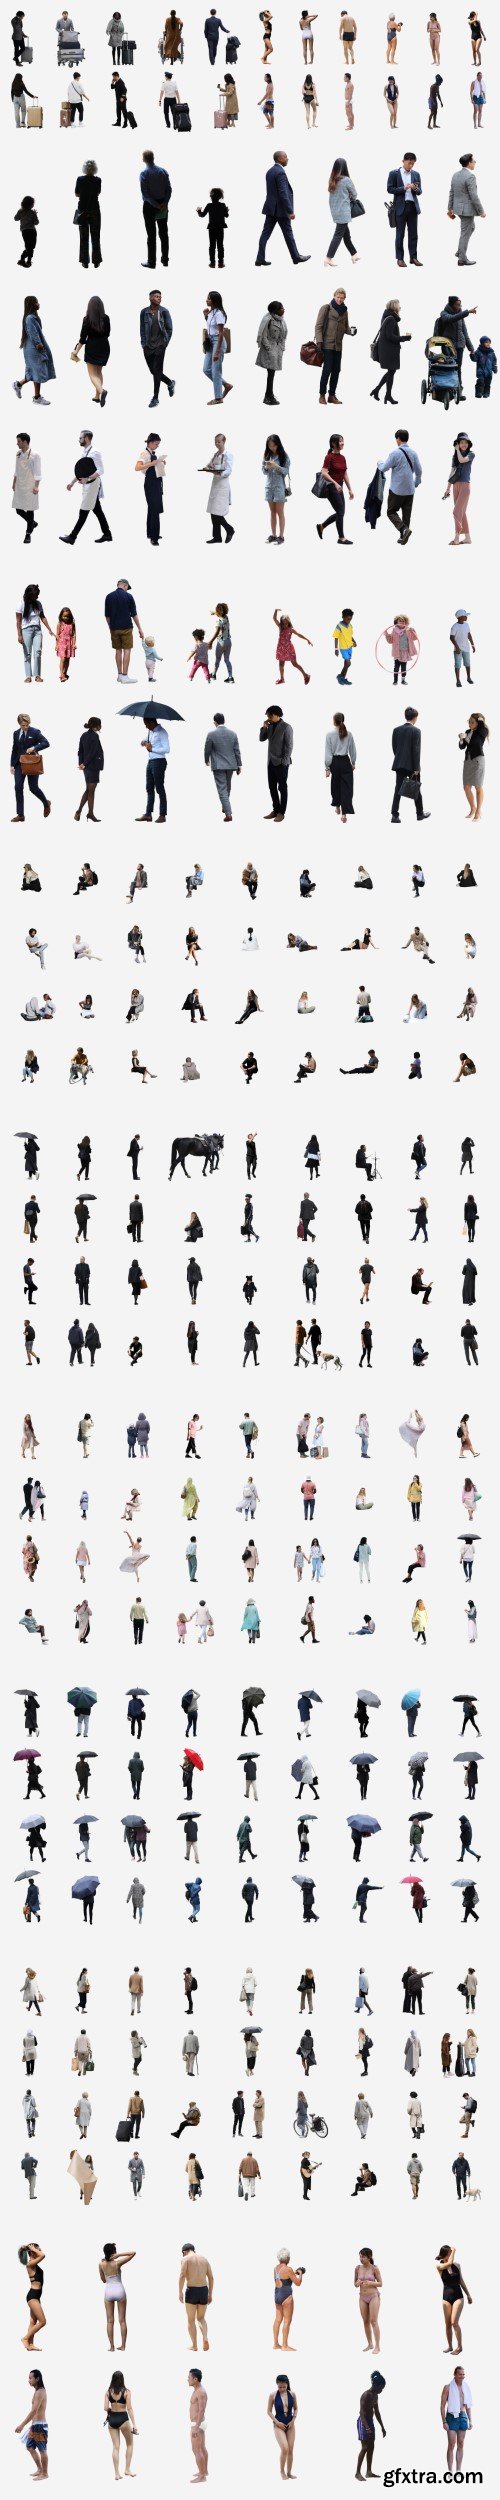 Studio Esinam - Large Collection of 2D Cutout People